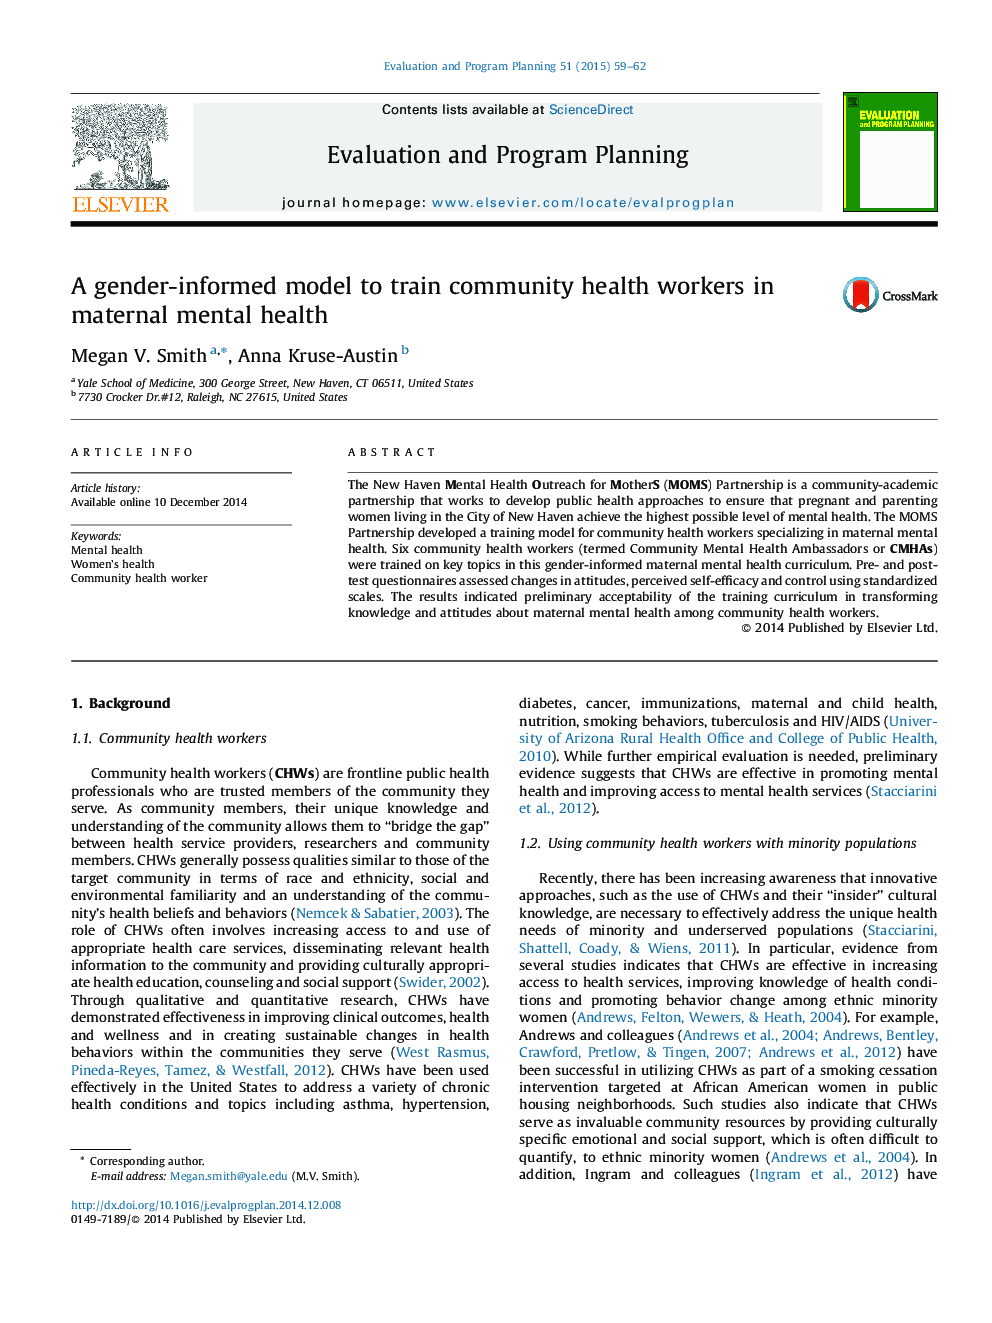 A gender-informed model to train community health workers in maternal mental health